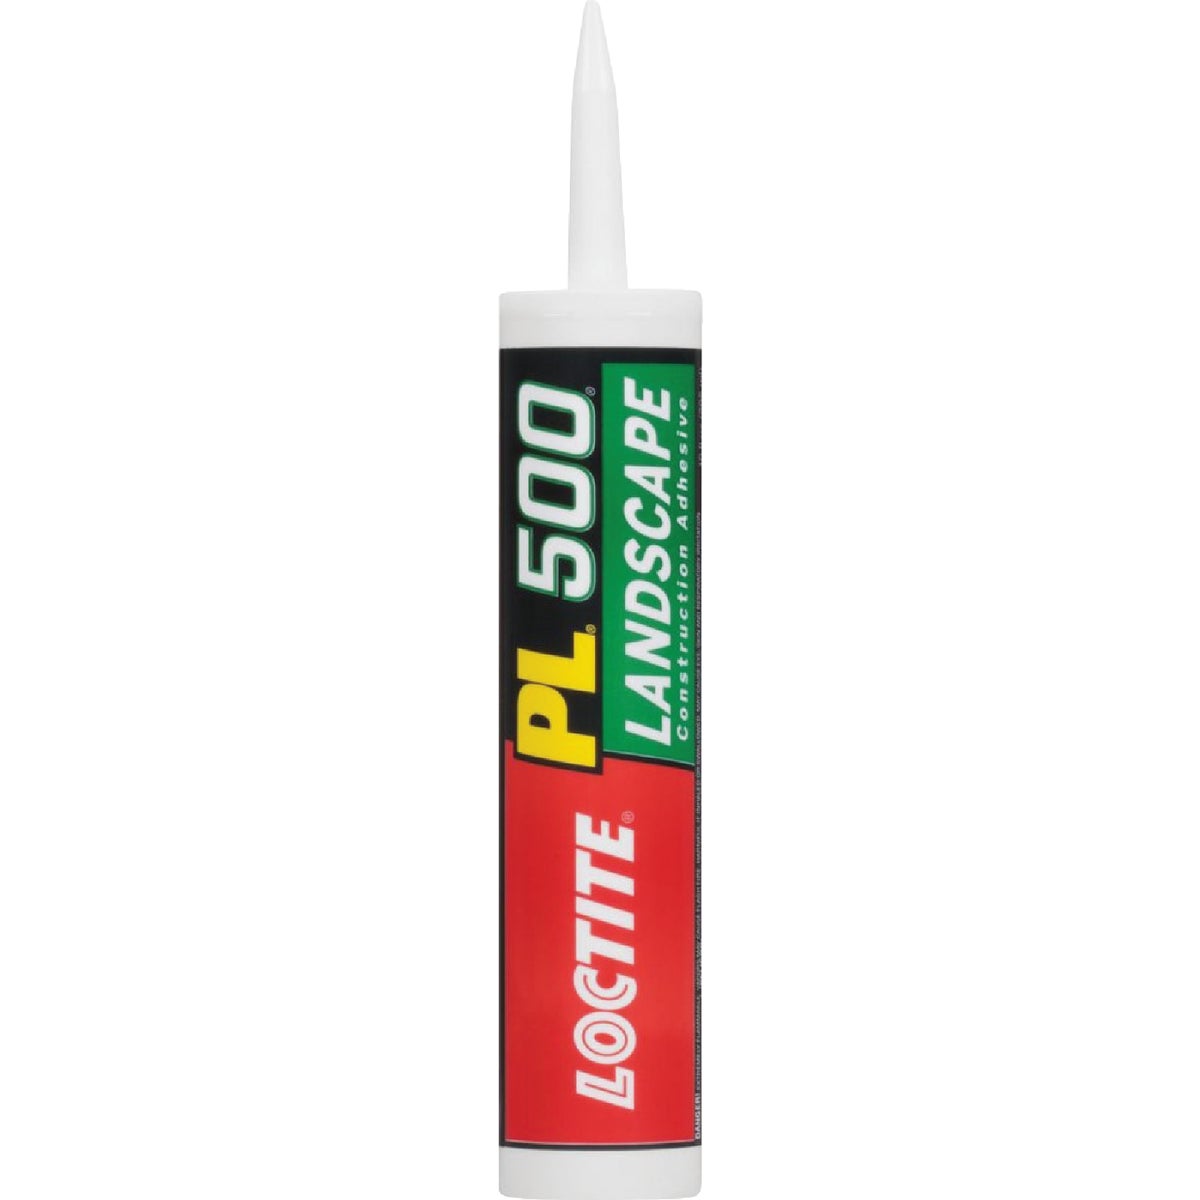 Item 264341, An exterior, heavy-duty, premium quality adhesive designed to meet any 